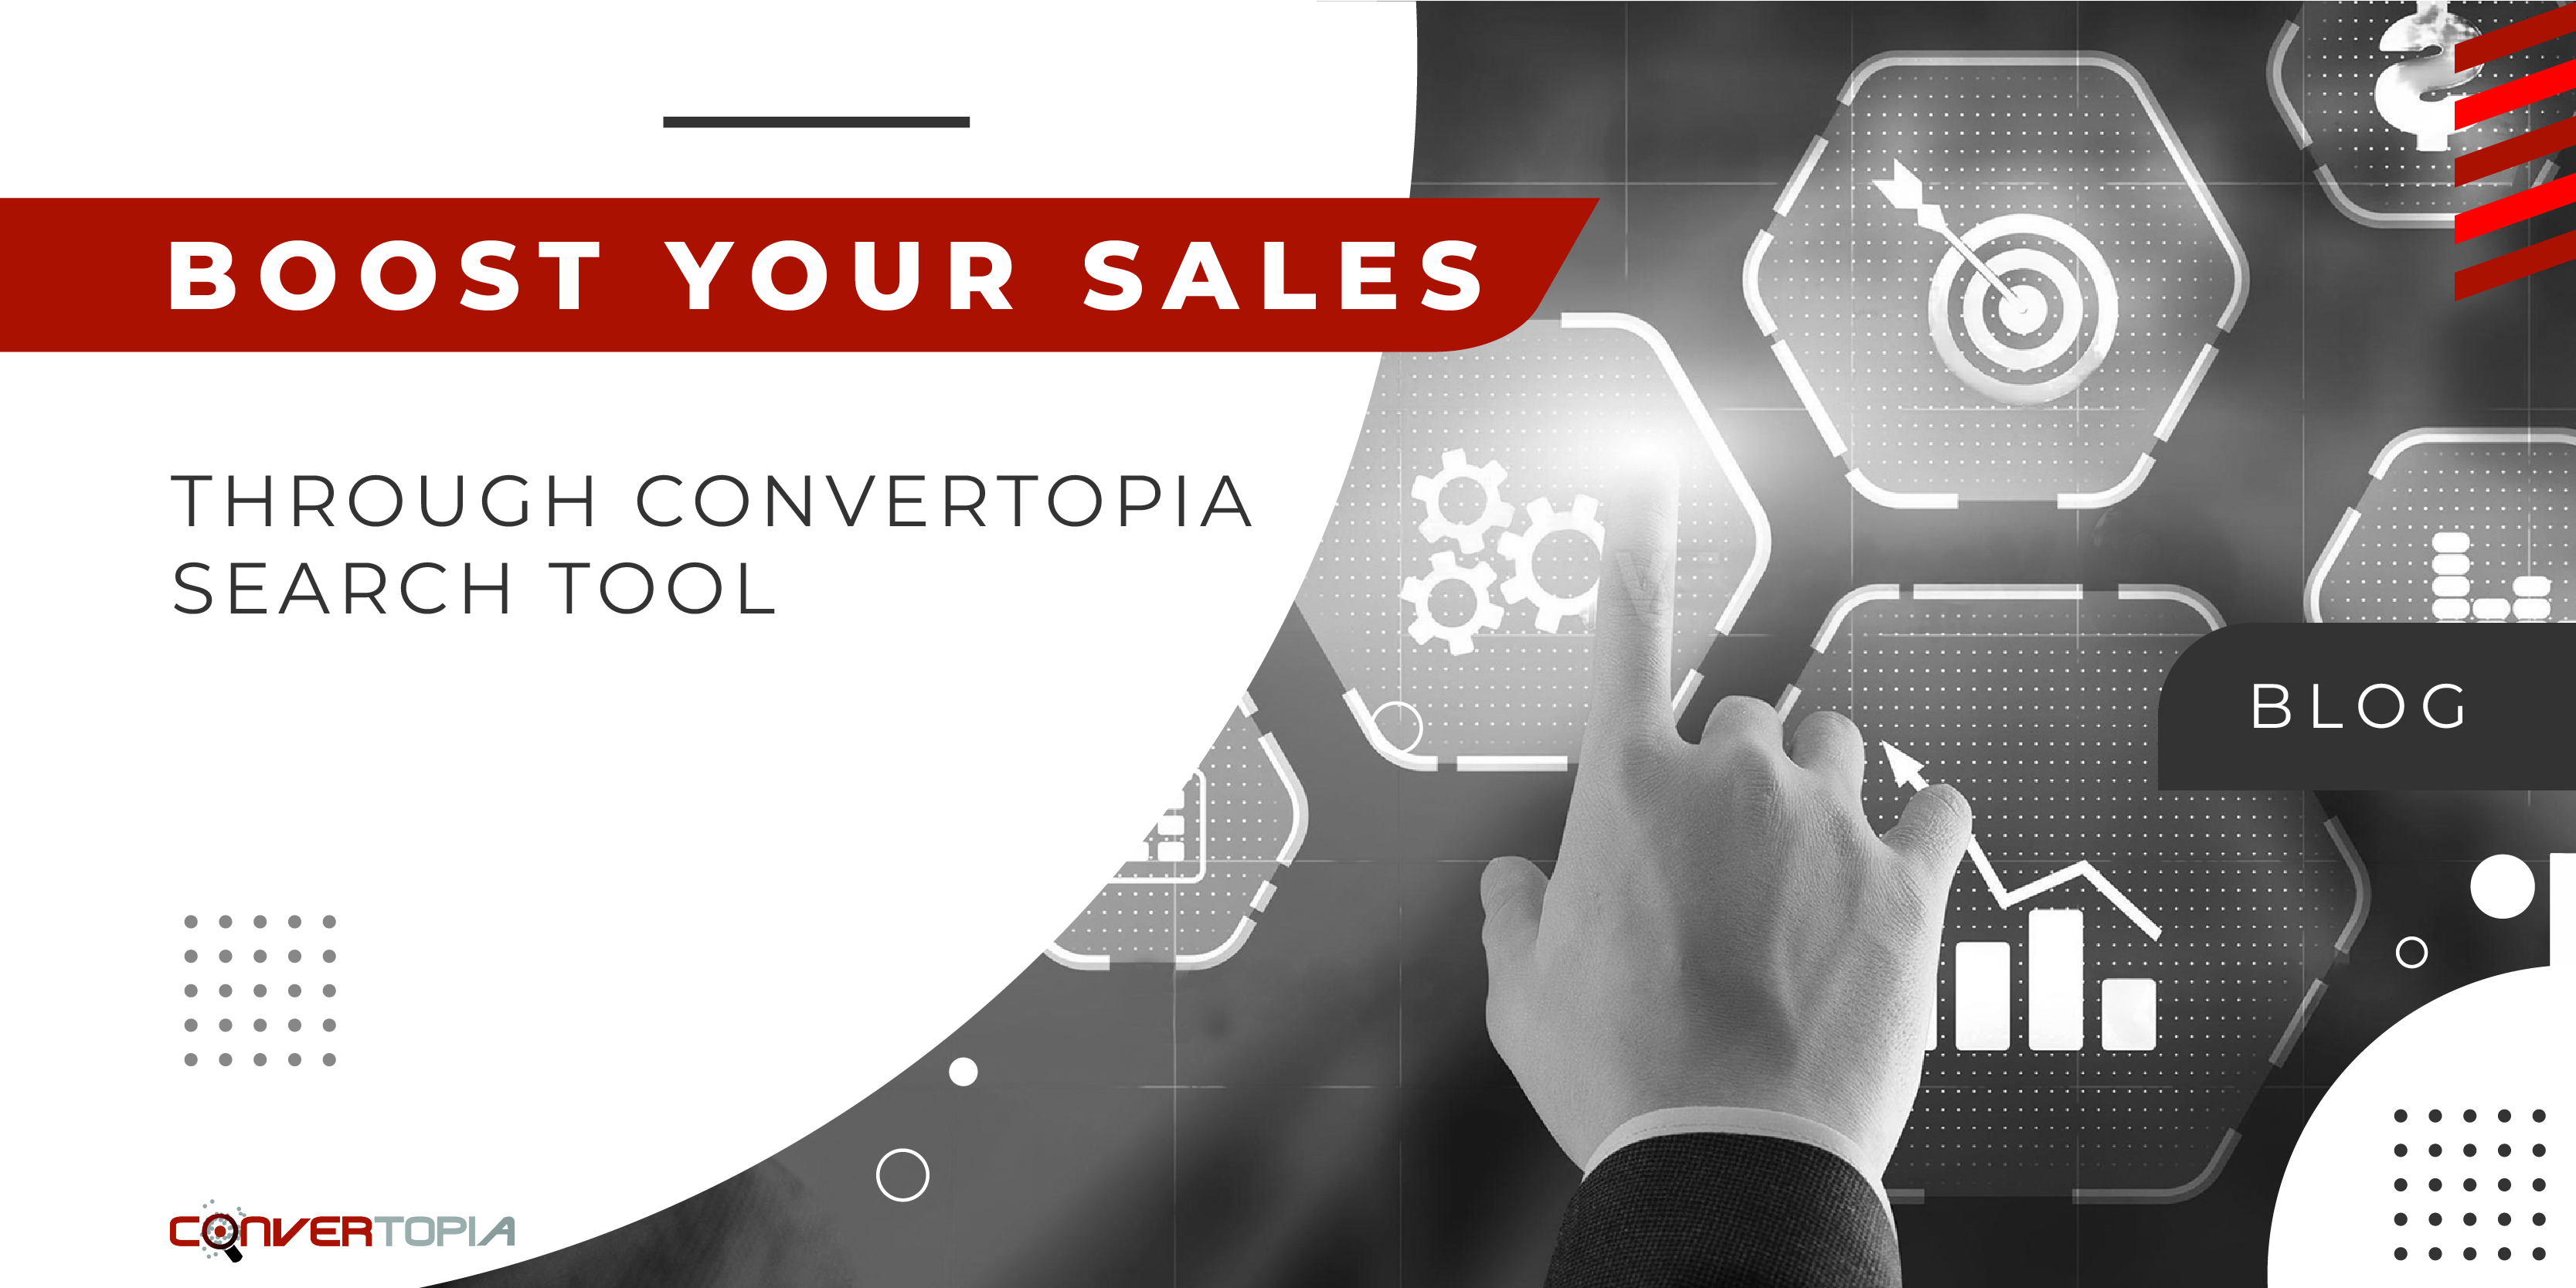 Boost your sales through convertopia site search tool